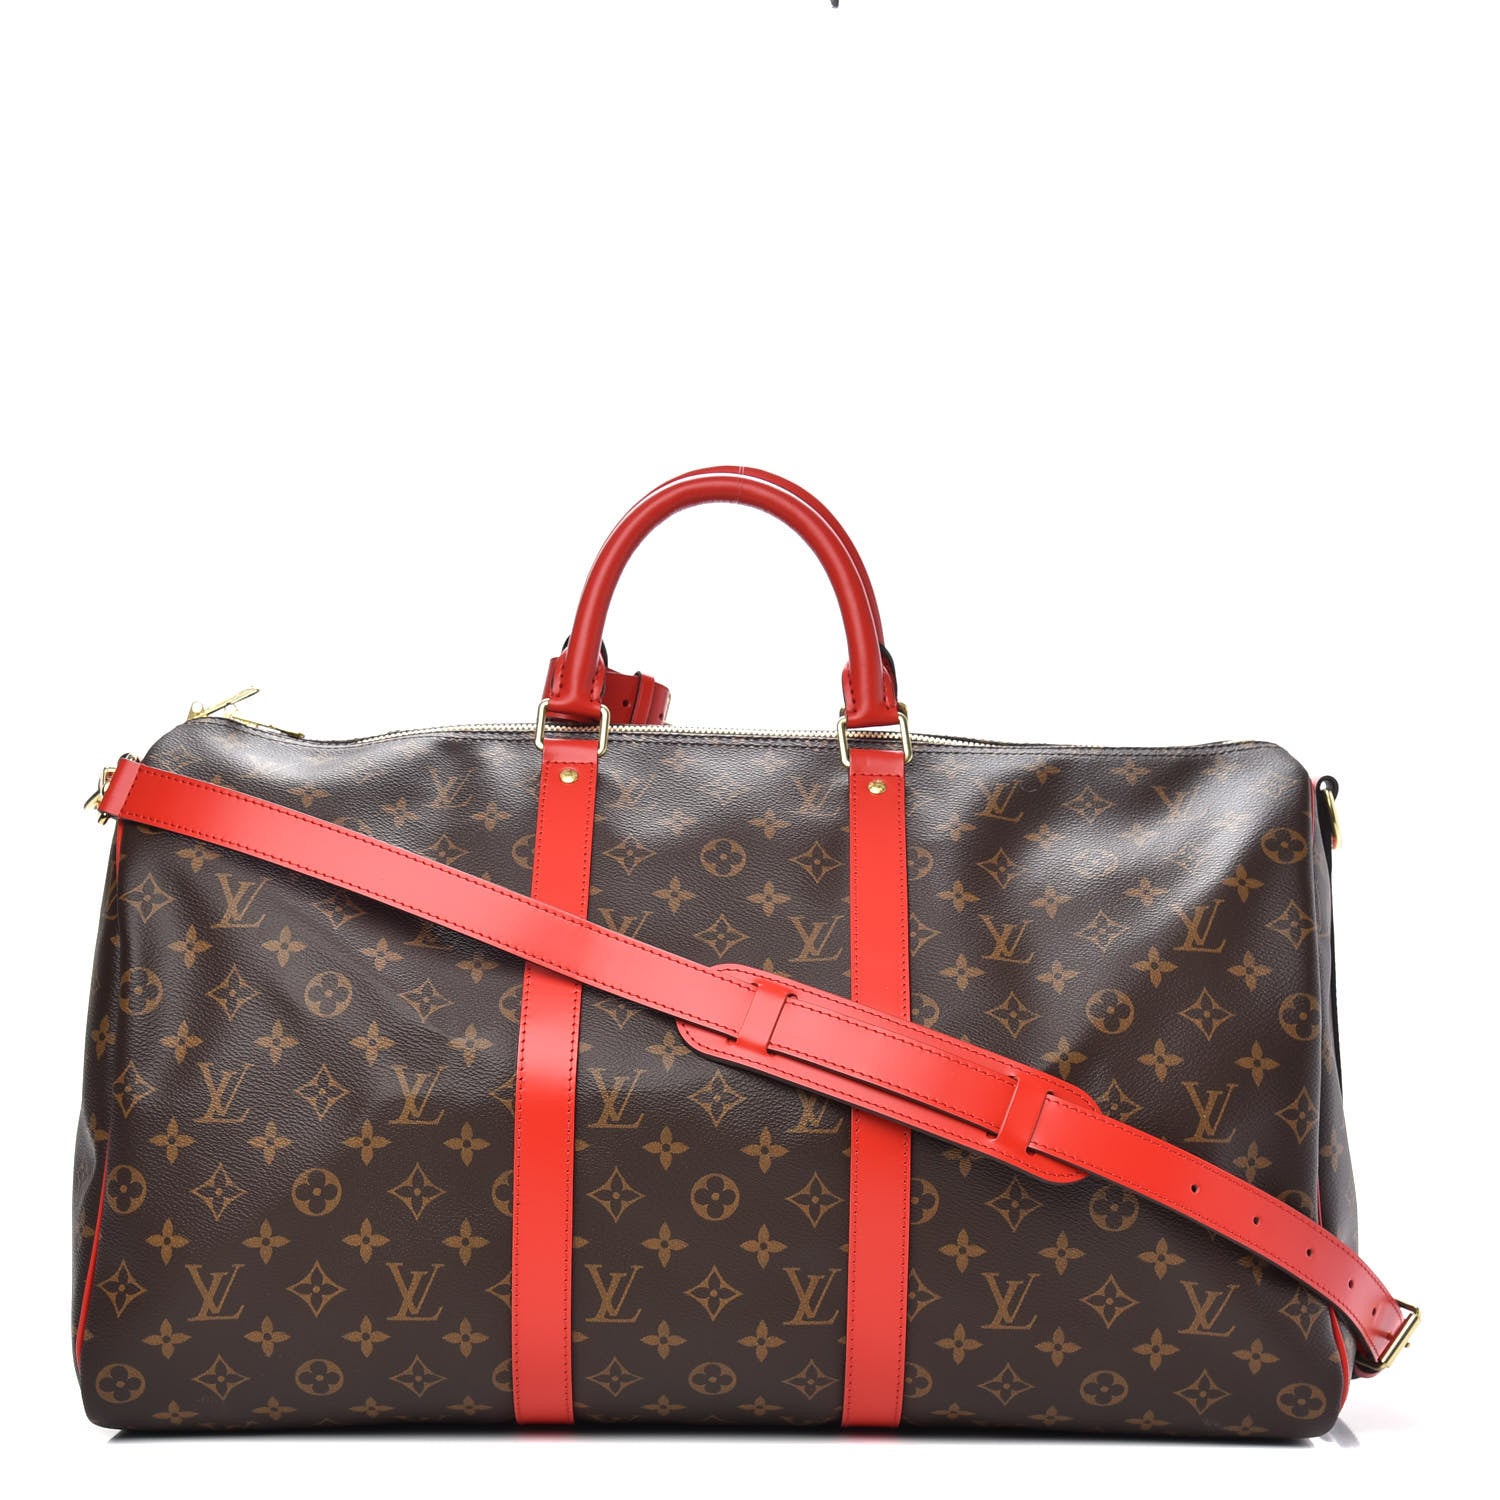 LOUIS VUITTON Louis Vuitton Keepall 50 Bandouliere Limited Edition Monogram with Red Coquelicot Trim - Vault 55